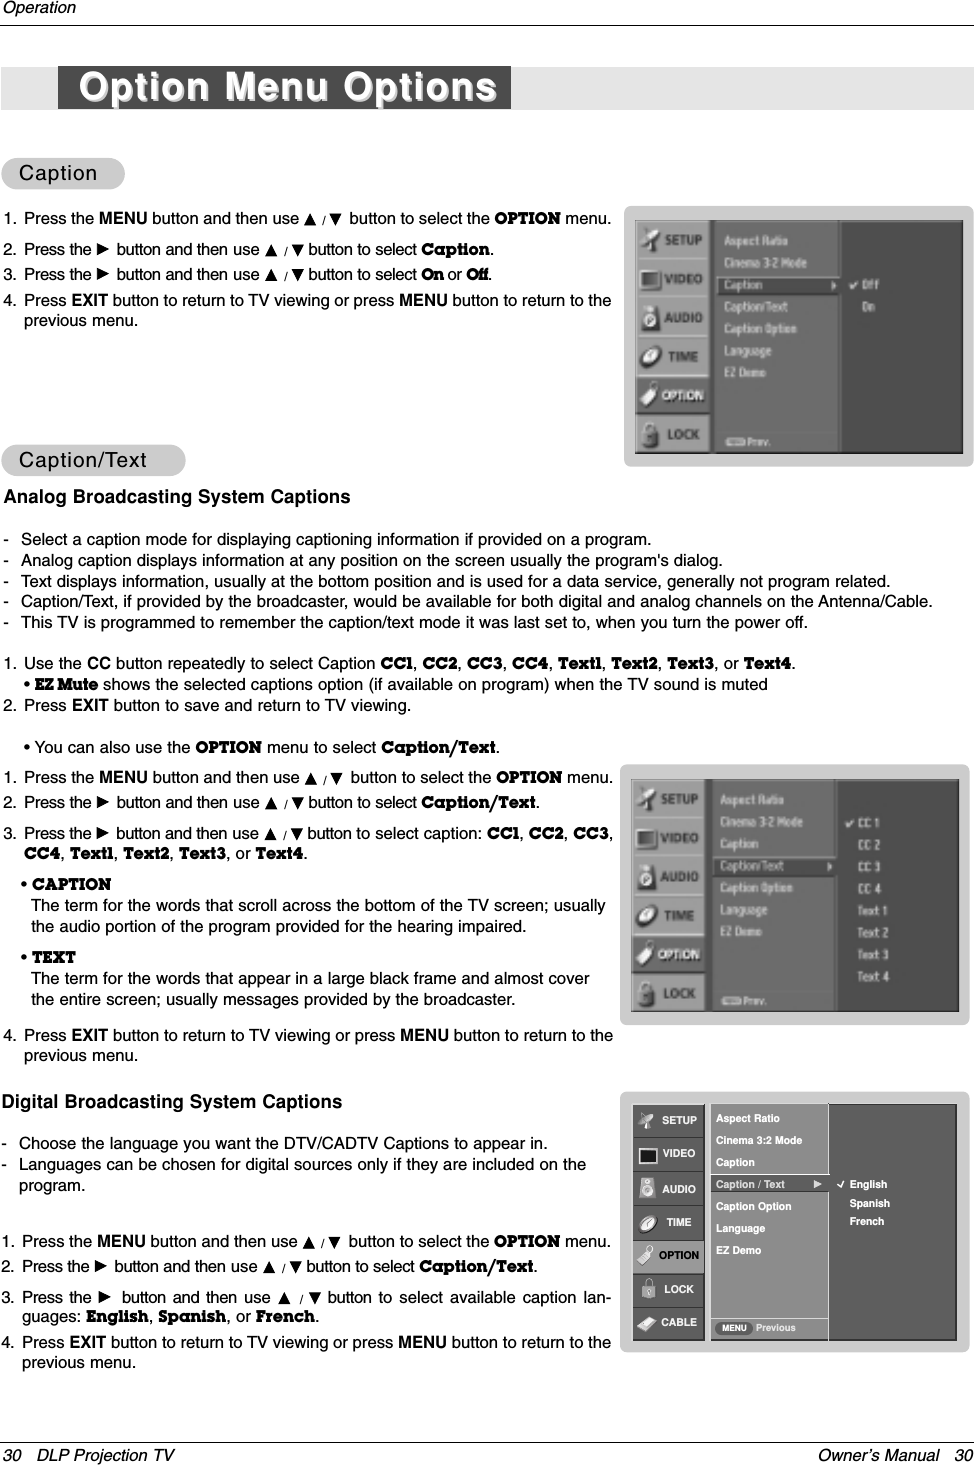 Owner’s Manual   3030 DLP Projection TVOperationCaptionCaptionDigital Broadcasting System Captions- Choose the language you want the DTV/CADTV Captions to appear in.- Languages can be chosen for digital sources only if they are included on theprogram.1. Press the MENU button and then use D / Ebutton to select the OPTION menu.2. Press the Gbutton and then use D / Ebutton to select Caption/Text.3. Press the Gbutton and then use  D  /  Ebutton to select available caption lan-guages: English, Spanish, or French.4. Press EXIT button to return to TV viewing or press MENU button to return to theprevious menu.1. Press the MENU button and then use D / Ebutton to select the OPTION menu.2. Press the Gbutton and then use D / Ebutton to select Caption.3. Press the Gbutton and then use D / Ebutton to select On or Off.4. Press EXIT button to return to TV viewing or press MENU button to return to theprevious menu.Caption/TCaption/TextextAnalog Broadcasting System Captions- Select a caption mode for displaying captioning information if provided on a program.- Analog caption displays information at any position on the screen usually the program&apos;s dialog.- Text displays information, usually at the bottom position and is used for a data service, generally not program related.- Caption/Text, if provided by the broadcaster, would be available for both digital and analog channels on the Antenna/Cable.- This TV is programmed to remember the caption/text mode it was last set to, when you turn the power off.1. Press the MENU button and then use D / Ebutton to select the OPTION menu.2. Press the Gbutton and then use D / Ebutton to select Caption/Text.3. Press the Gbutton and then use D / Ebutton to select caption: CC1, CC2, CC3,CC4, Text1, Text2, Text3, or Text4.• CAPTIONThe term for the words that scroll across the bottom of the TV screen; usuallythe audio portion of the program provided for the hearing impaired. • TEXTThe term for the words that appear in a large black frame and almost coverthe entire screen; usually messages provided by the broadcaster.4. Press EXIT button to return to TV viewing or press MENU button to return to theprevious menu.1. Use the CC button repeatedly to select Caption CC1, CC2, CC3, CC4, Text1, Text2, Text3, or Text4. • EZ Mute shows the selected captions option (if available on program) when the TV sound is muted2. Press EXIT button to save and return to TV viewing.• You can also use the OPTION menu to select Caption/Text.Option Menu OptionsOption Menu OptionsSETUPVIDEOAUDIOTIMEOPTIONLOCKCABLE PreviousMENUEnglishSpanishFrenchAspect RatioCinema 3:2 ModeCaptionCaption / Text  GCaption OptionLanguageEZ Demo